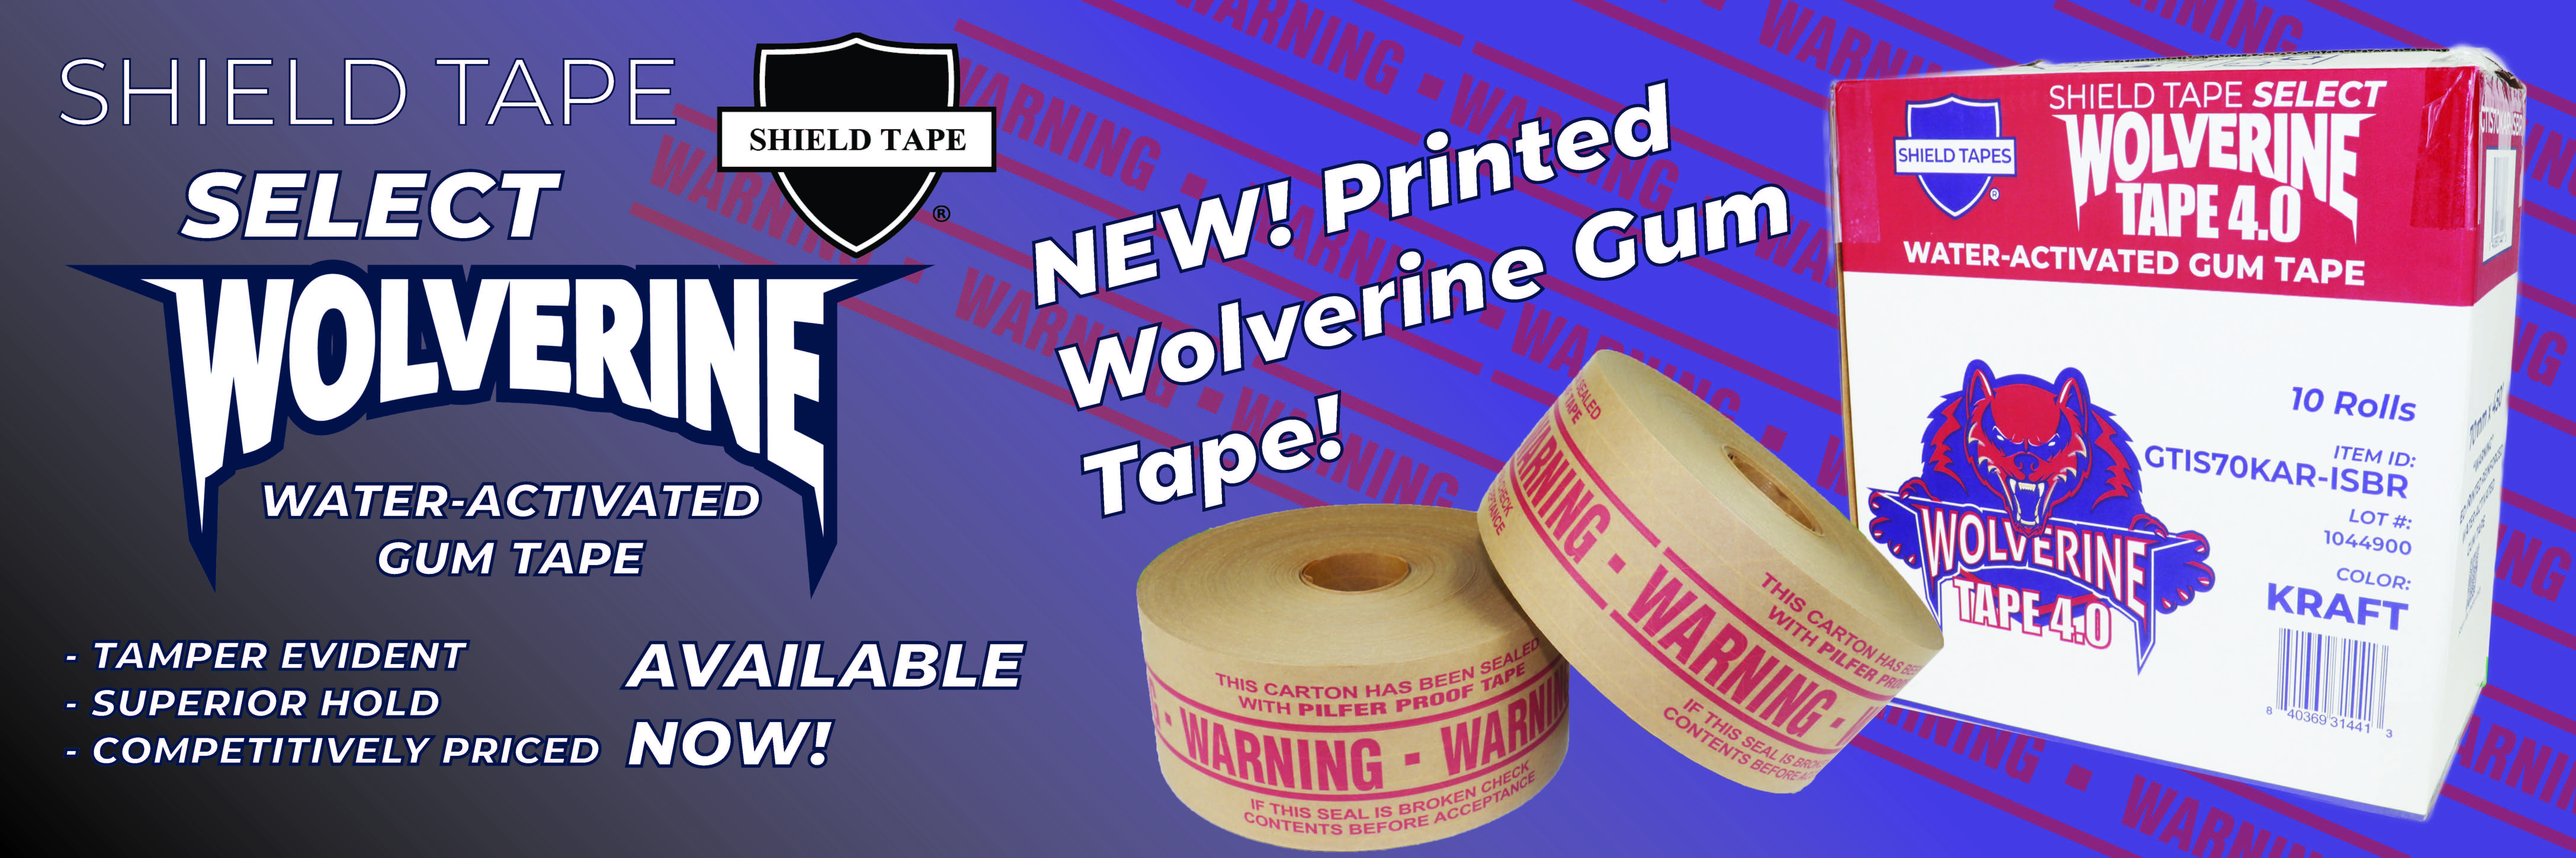 Wolverine Water-Activated Gum Tape Available Now from Wrap-Tite